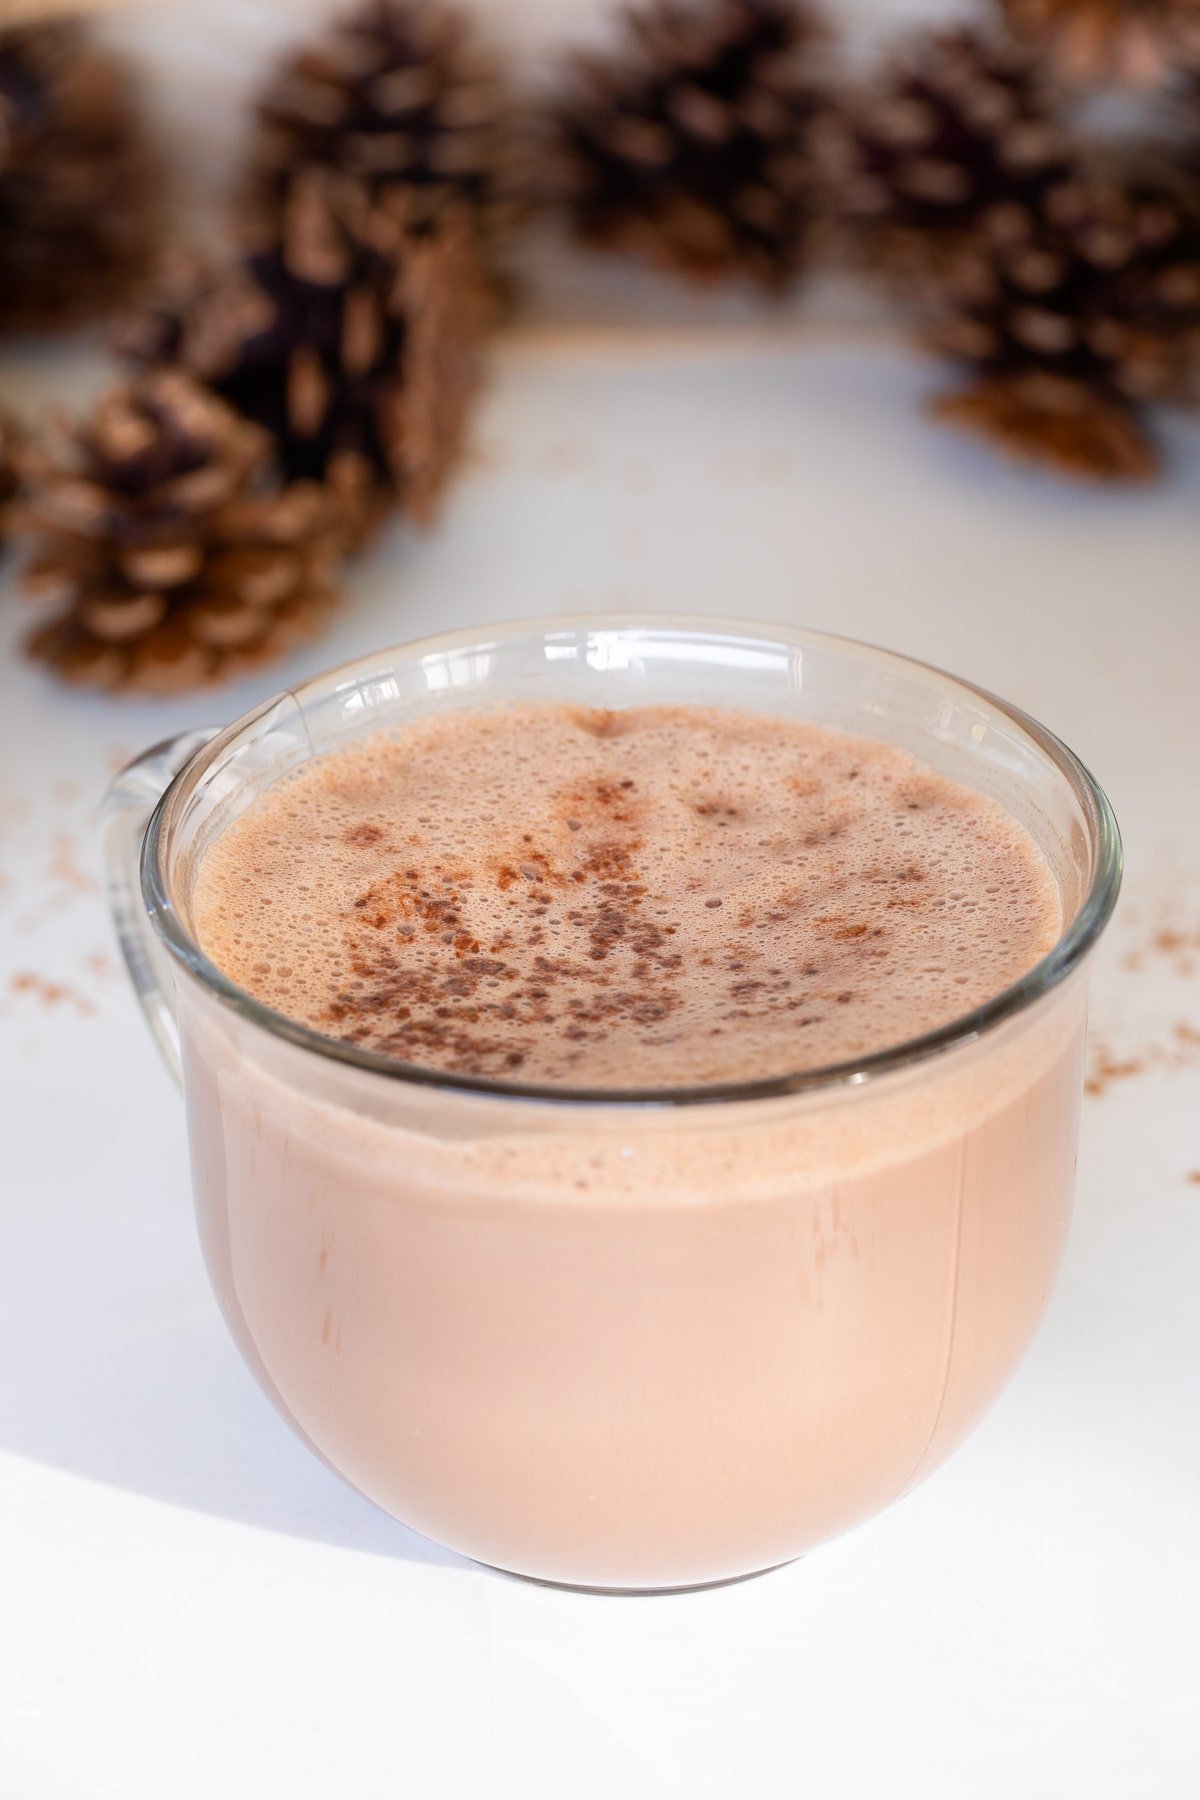 easy hot chocolate with cocoa powder up close.